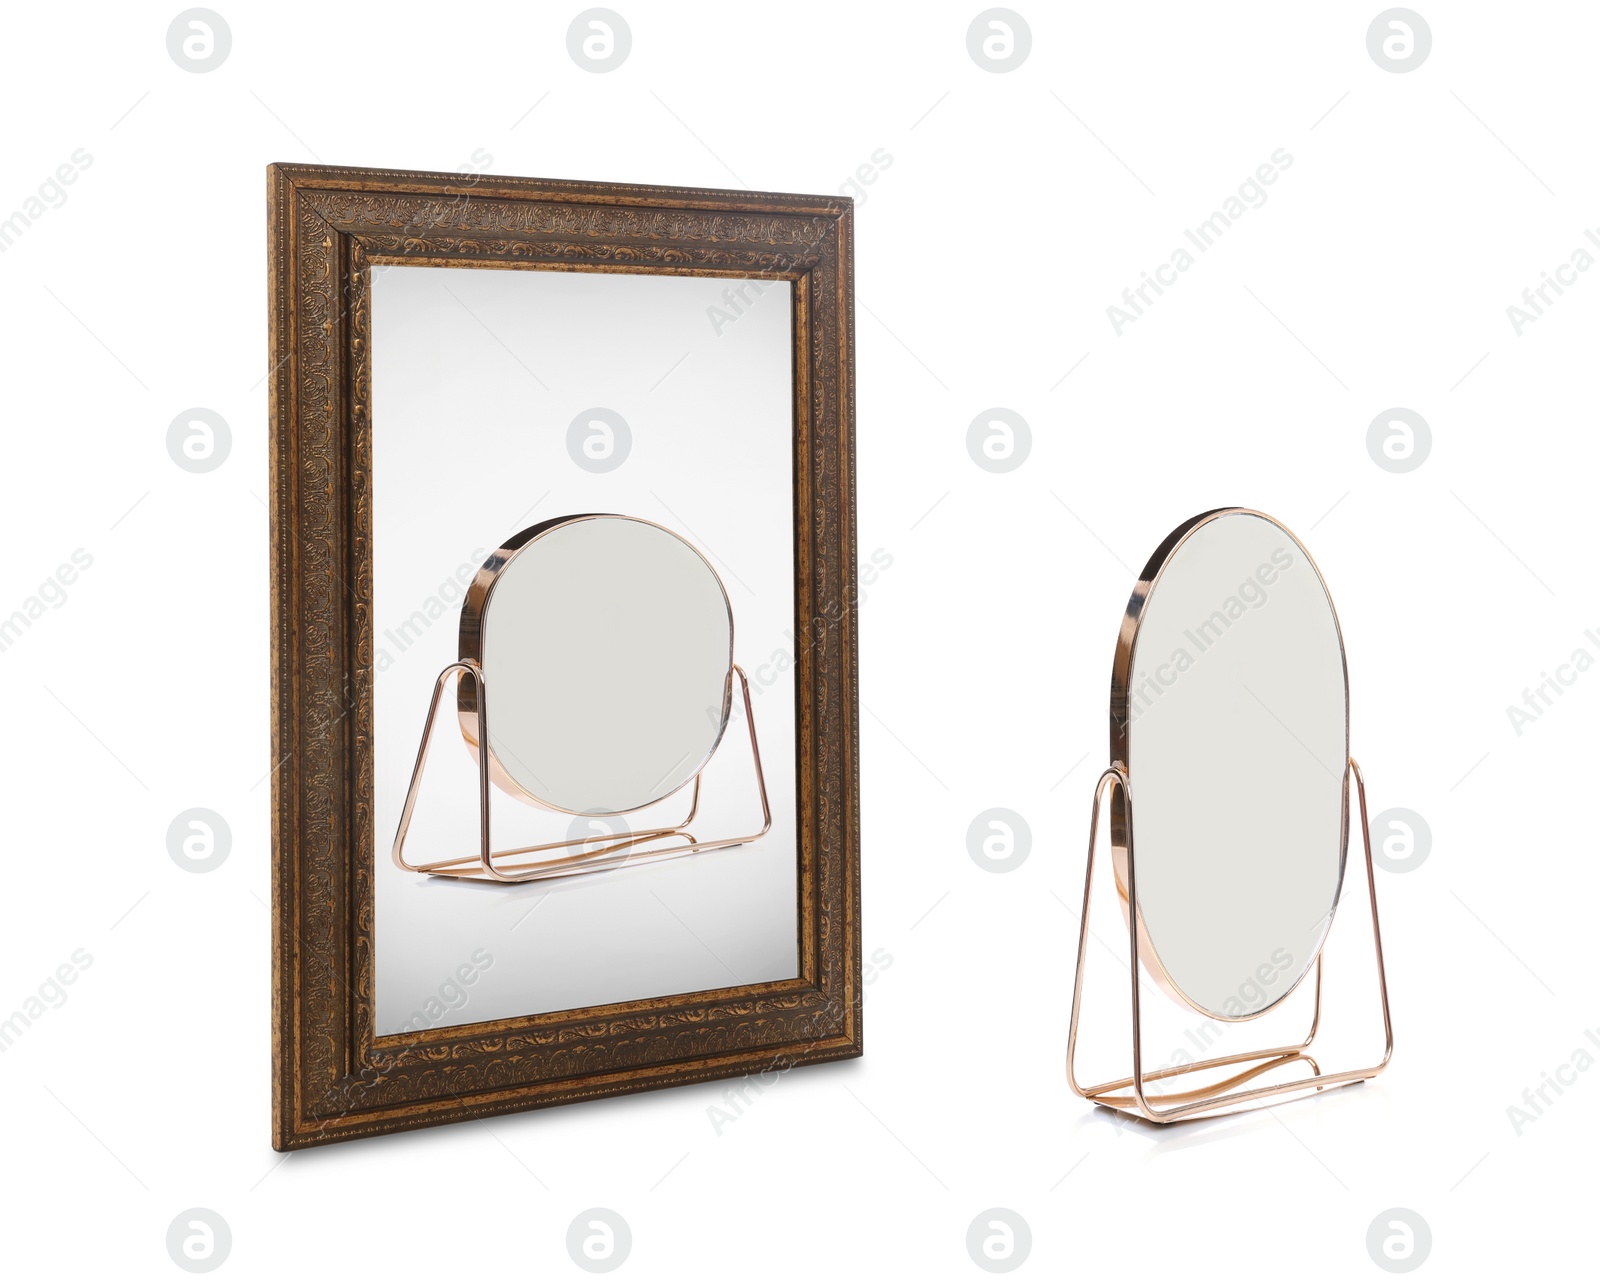 Image of Desk mirror and reflection on white background